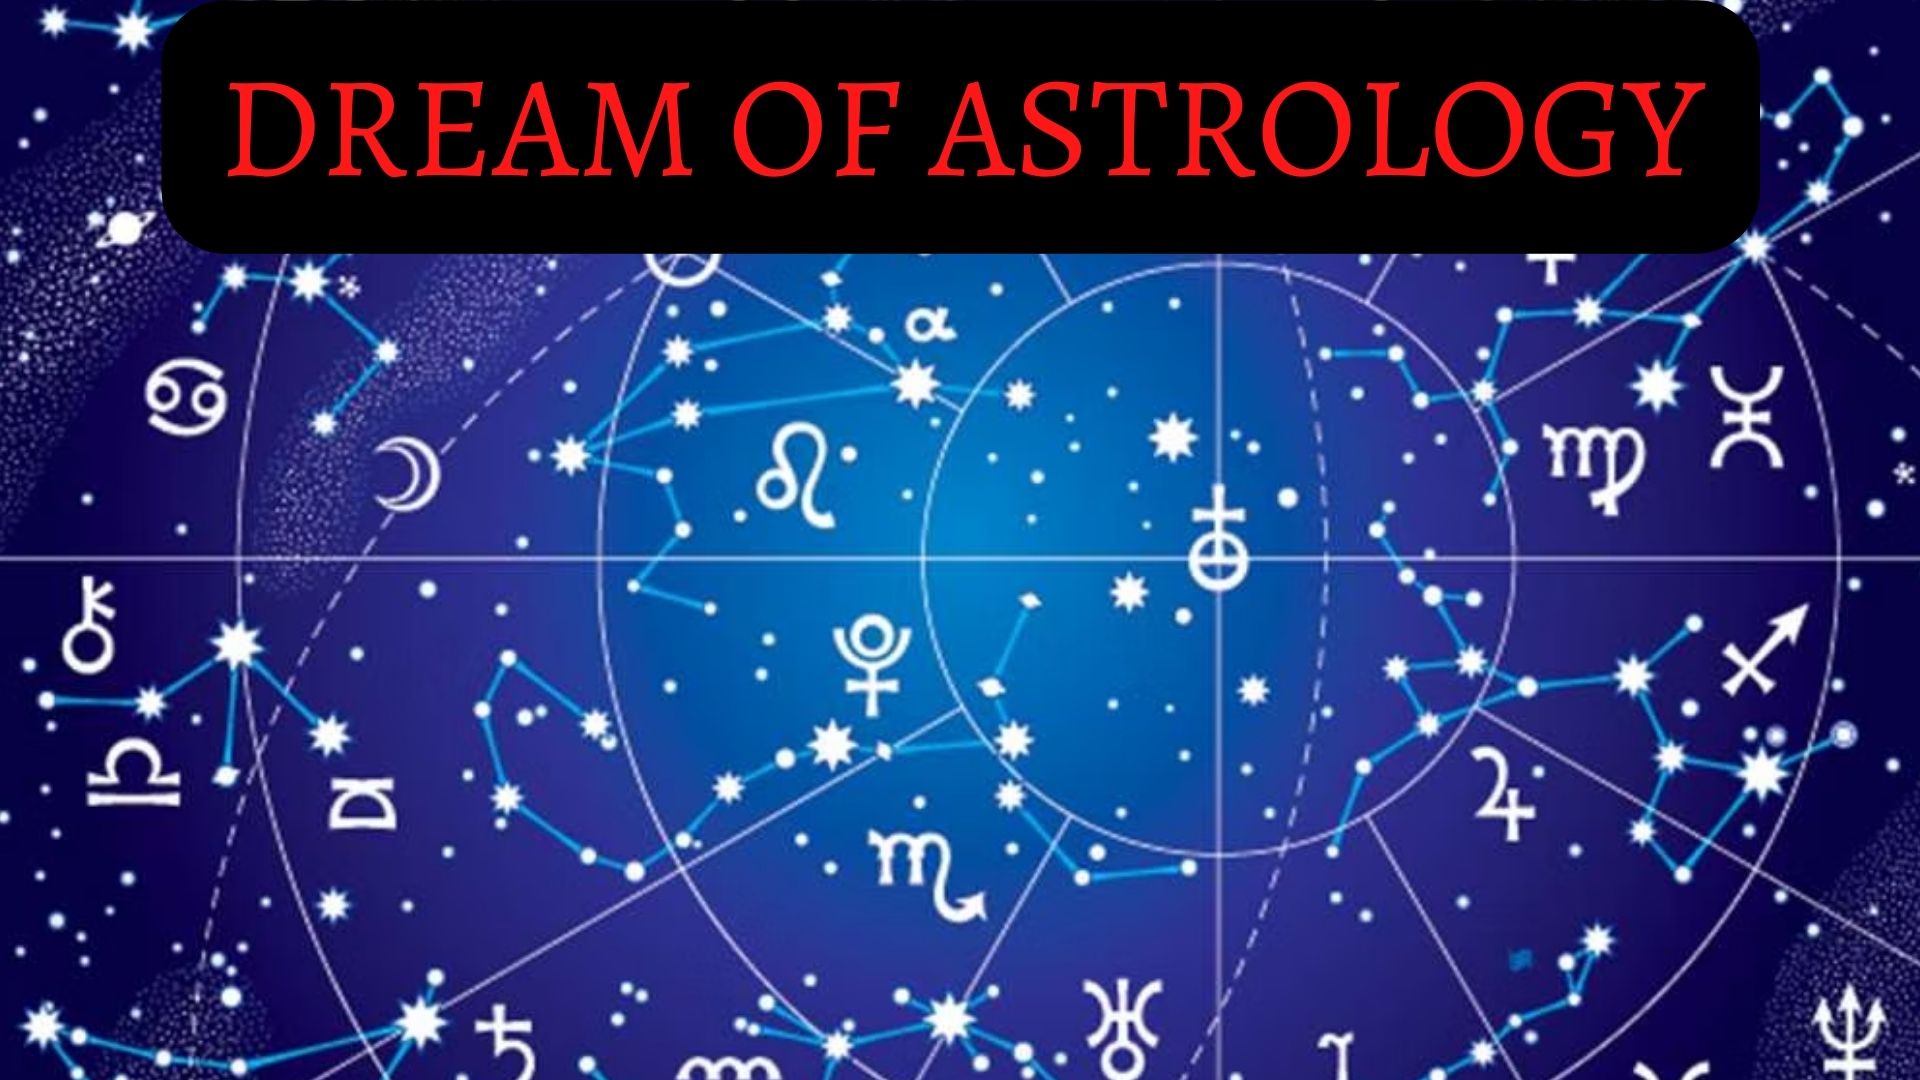 Dream Of Astrology - Meaning And Interpretation